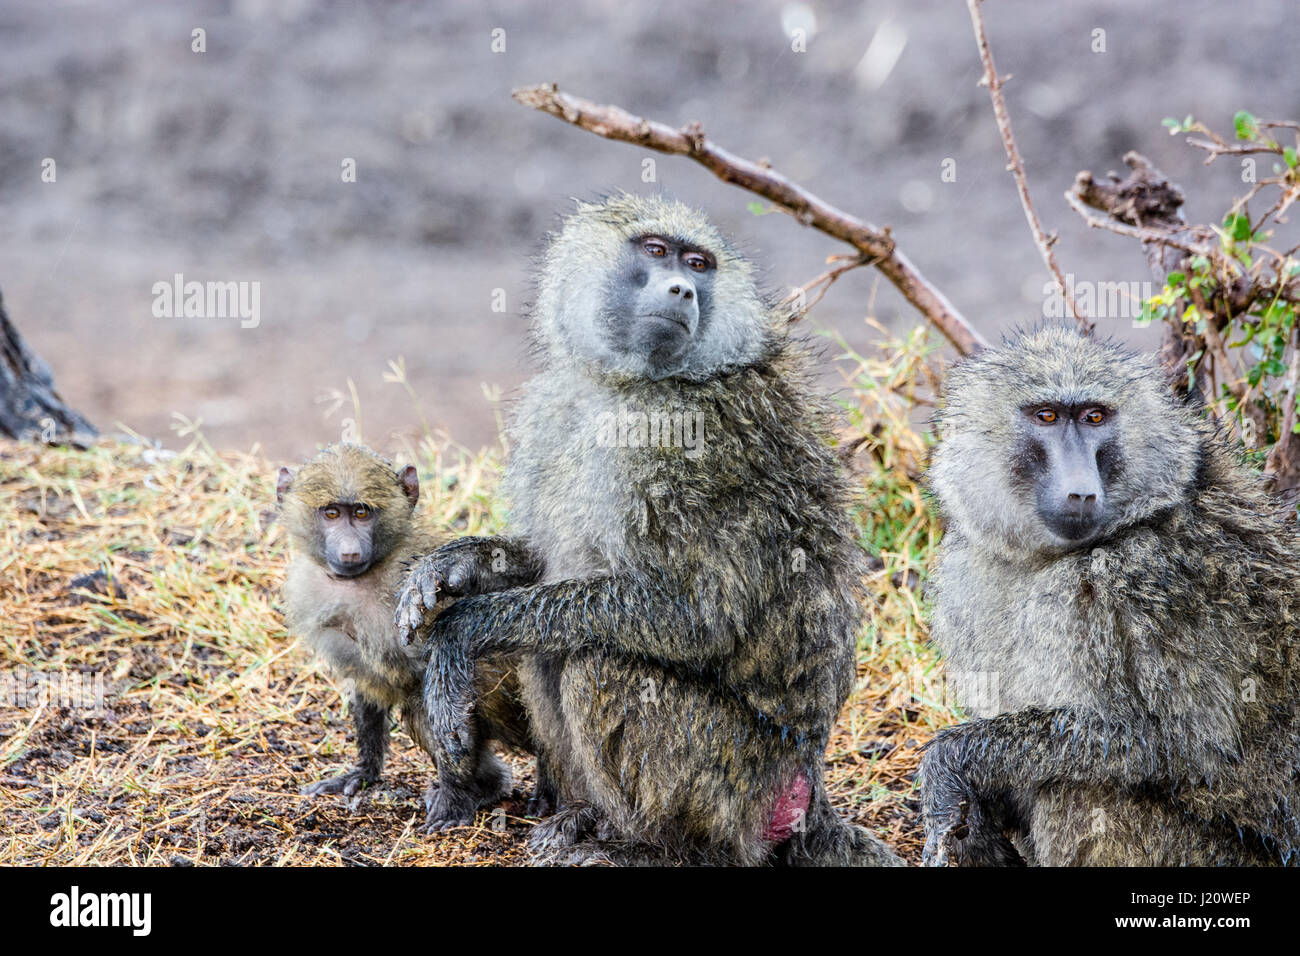 Family of wild Olive Baboons, Papio anubis, with a small baby, Ol Pejeta Conservancy, Kenya, East Africa Stock Photo